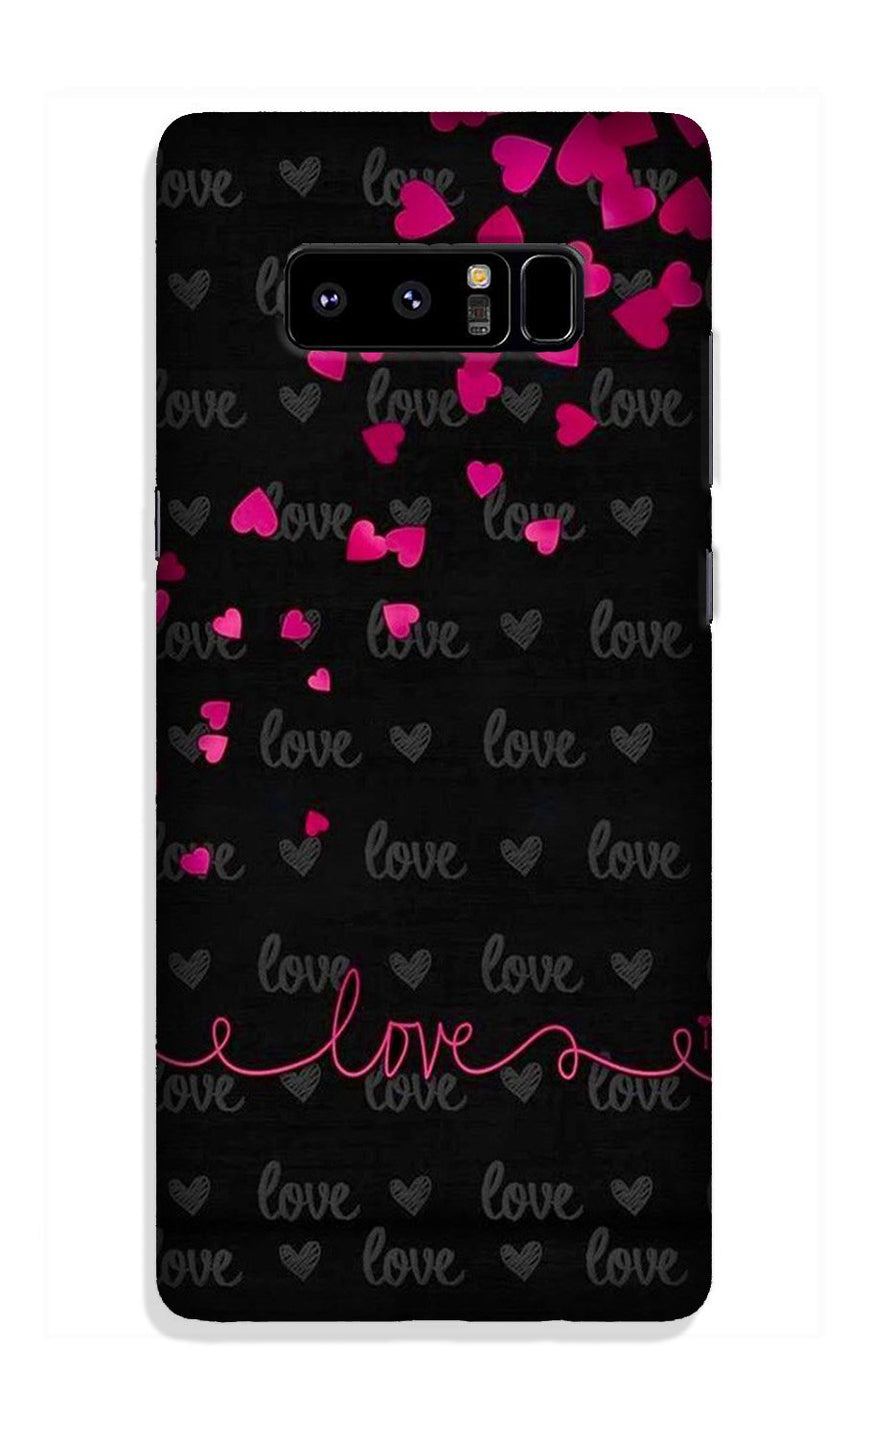 Love in Air Case for Galaxy Note 8